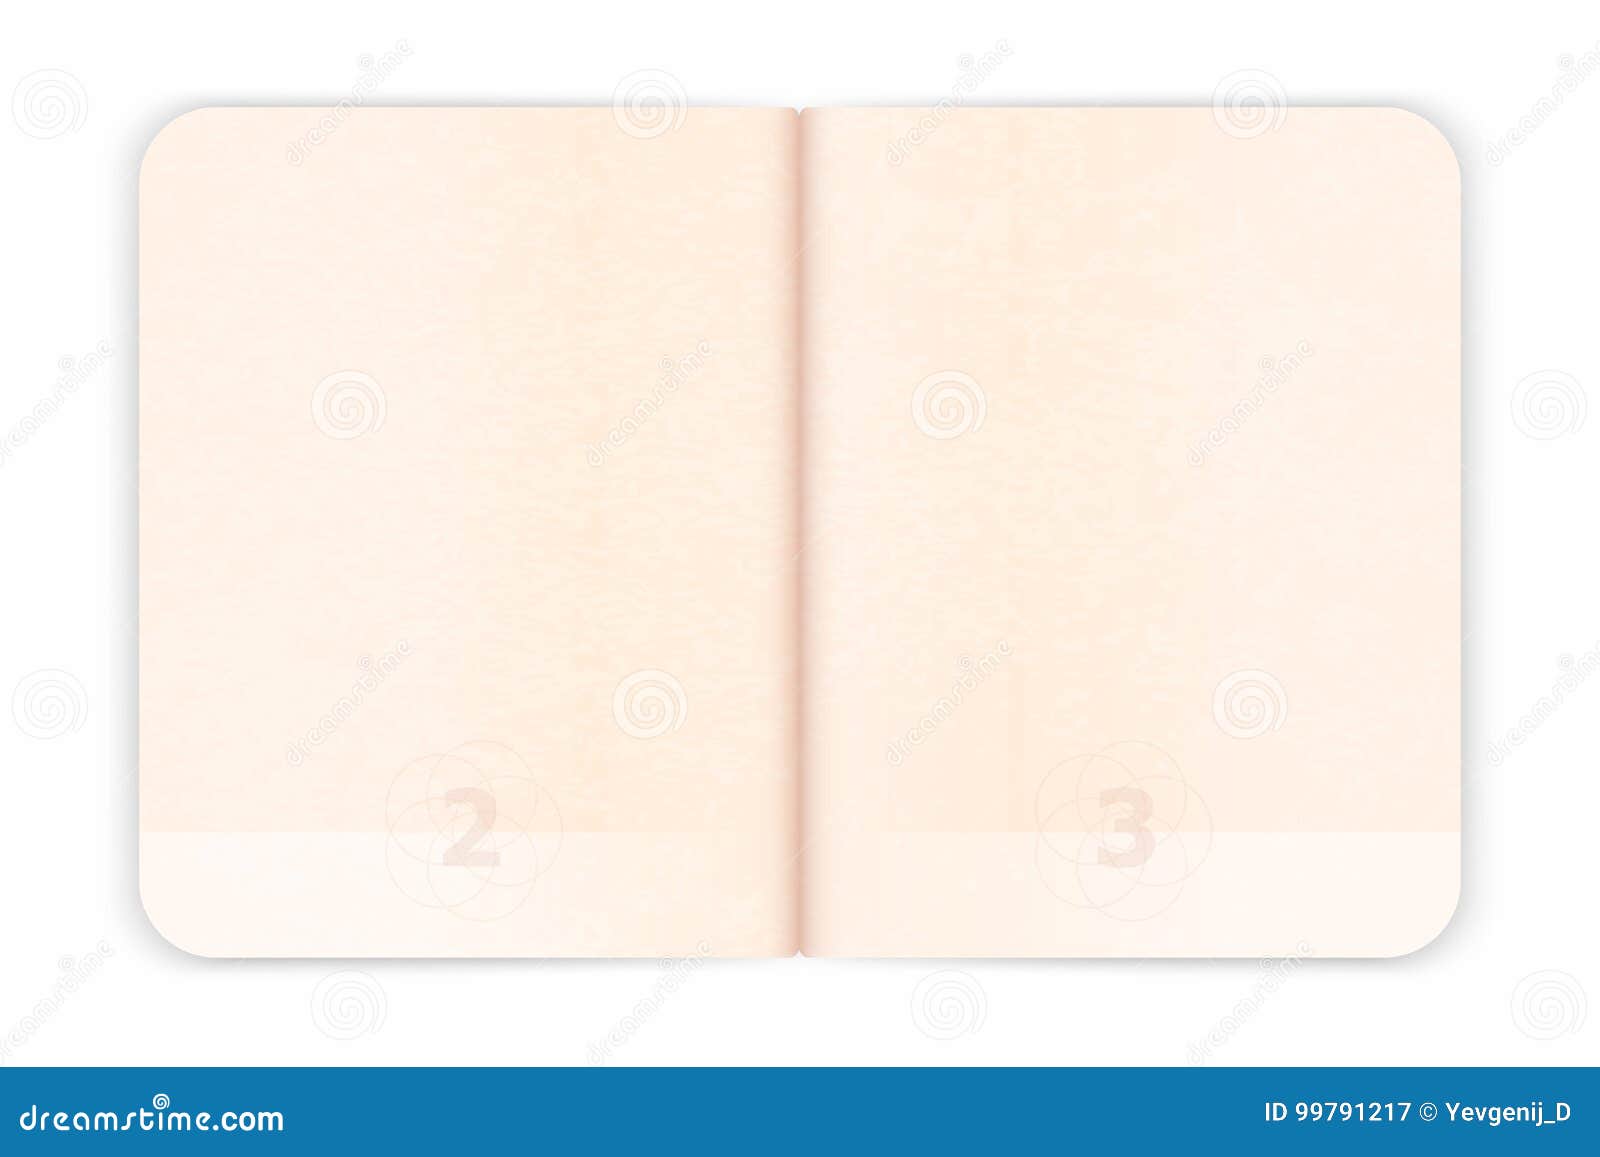  passport blank pages for visa stamps. empty passport with watermark